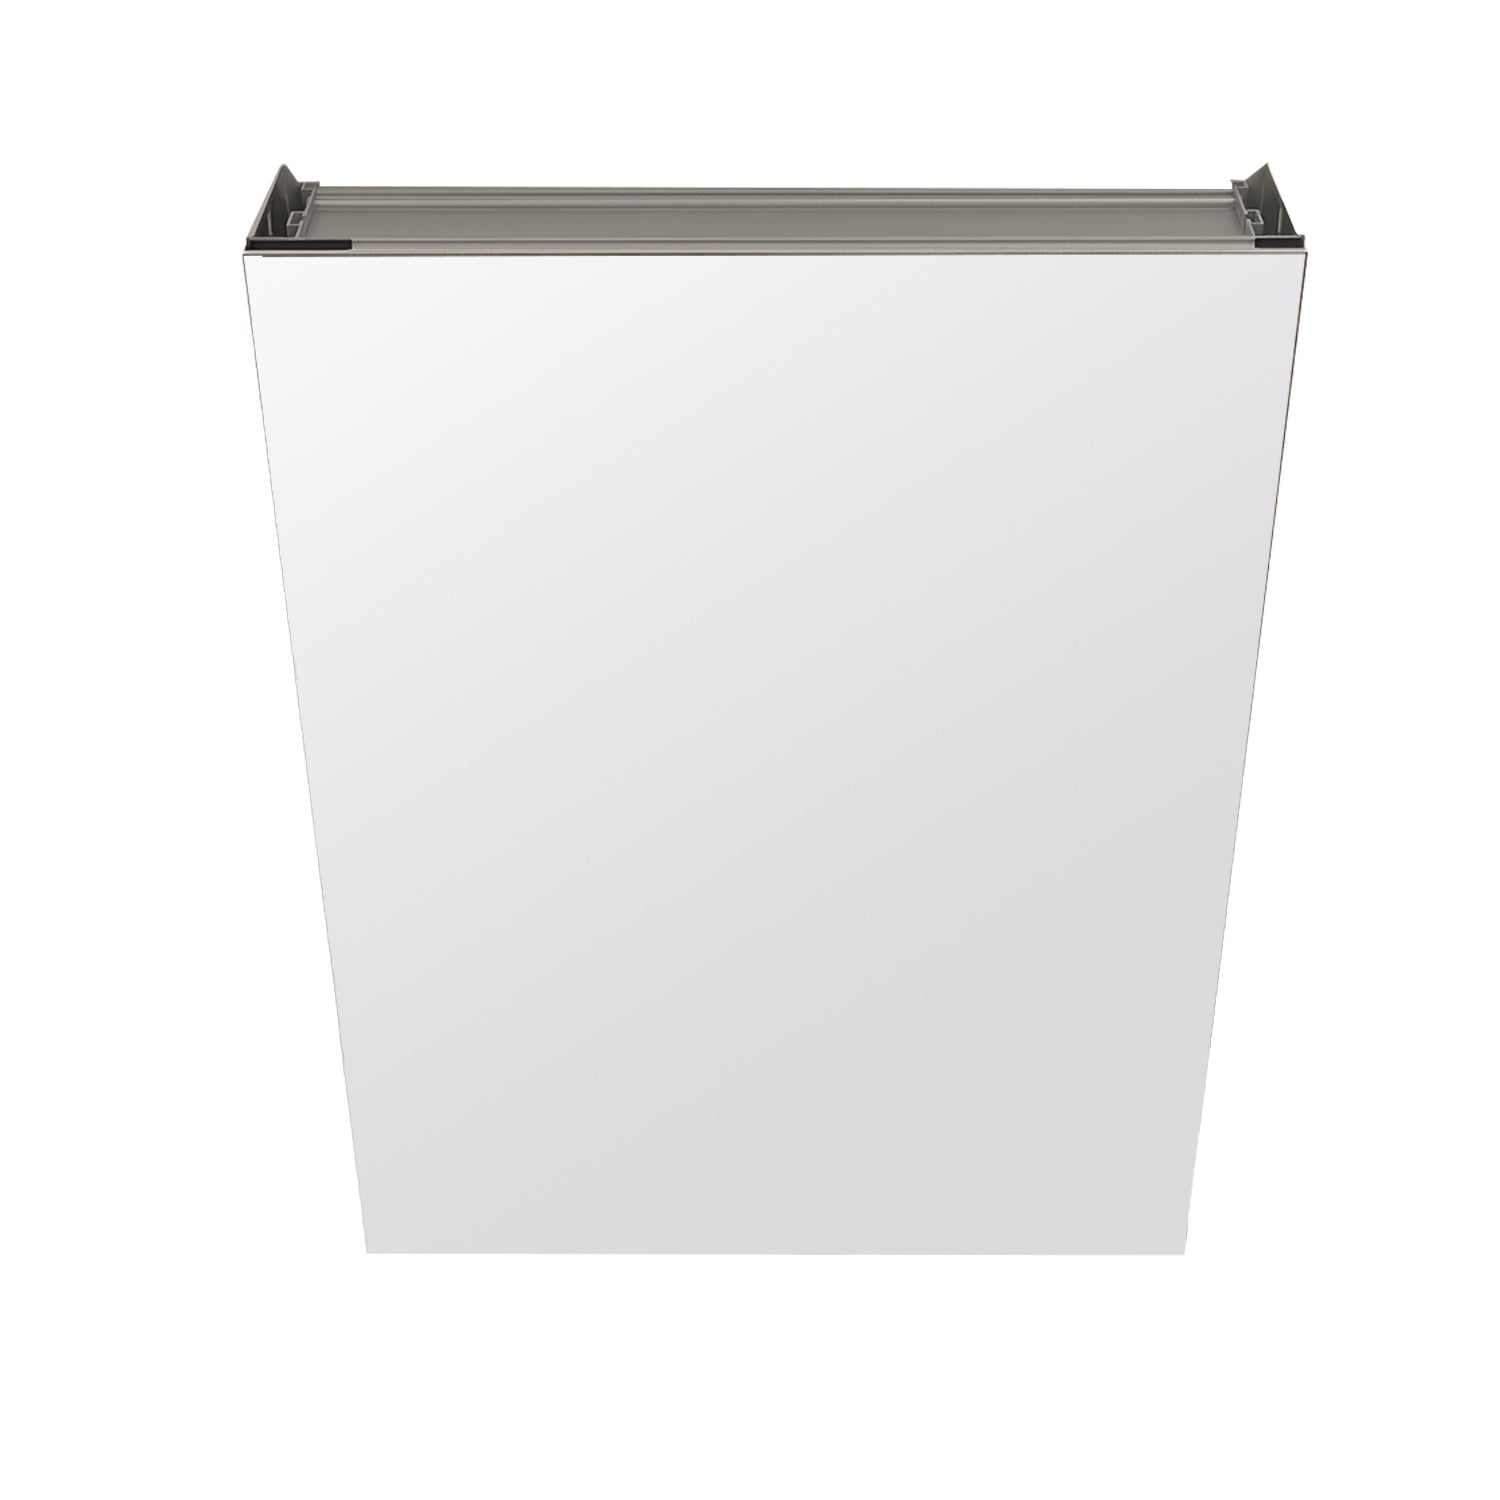 20 x 26 in. Rectangular Silver Aluminum Recessed/Surface Mount Medicine Cabinet with Mirror